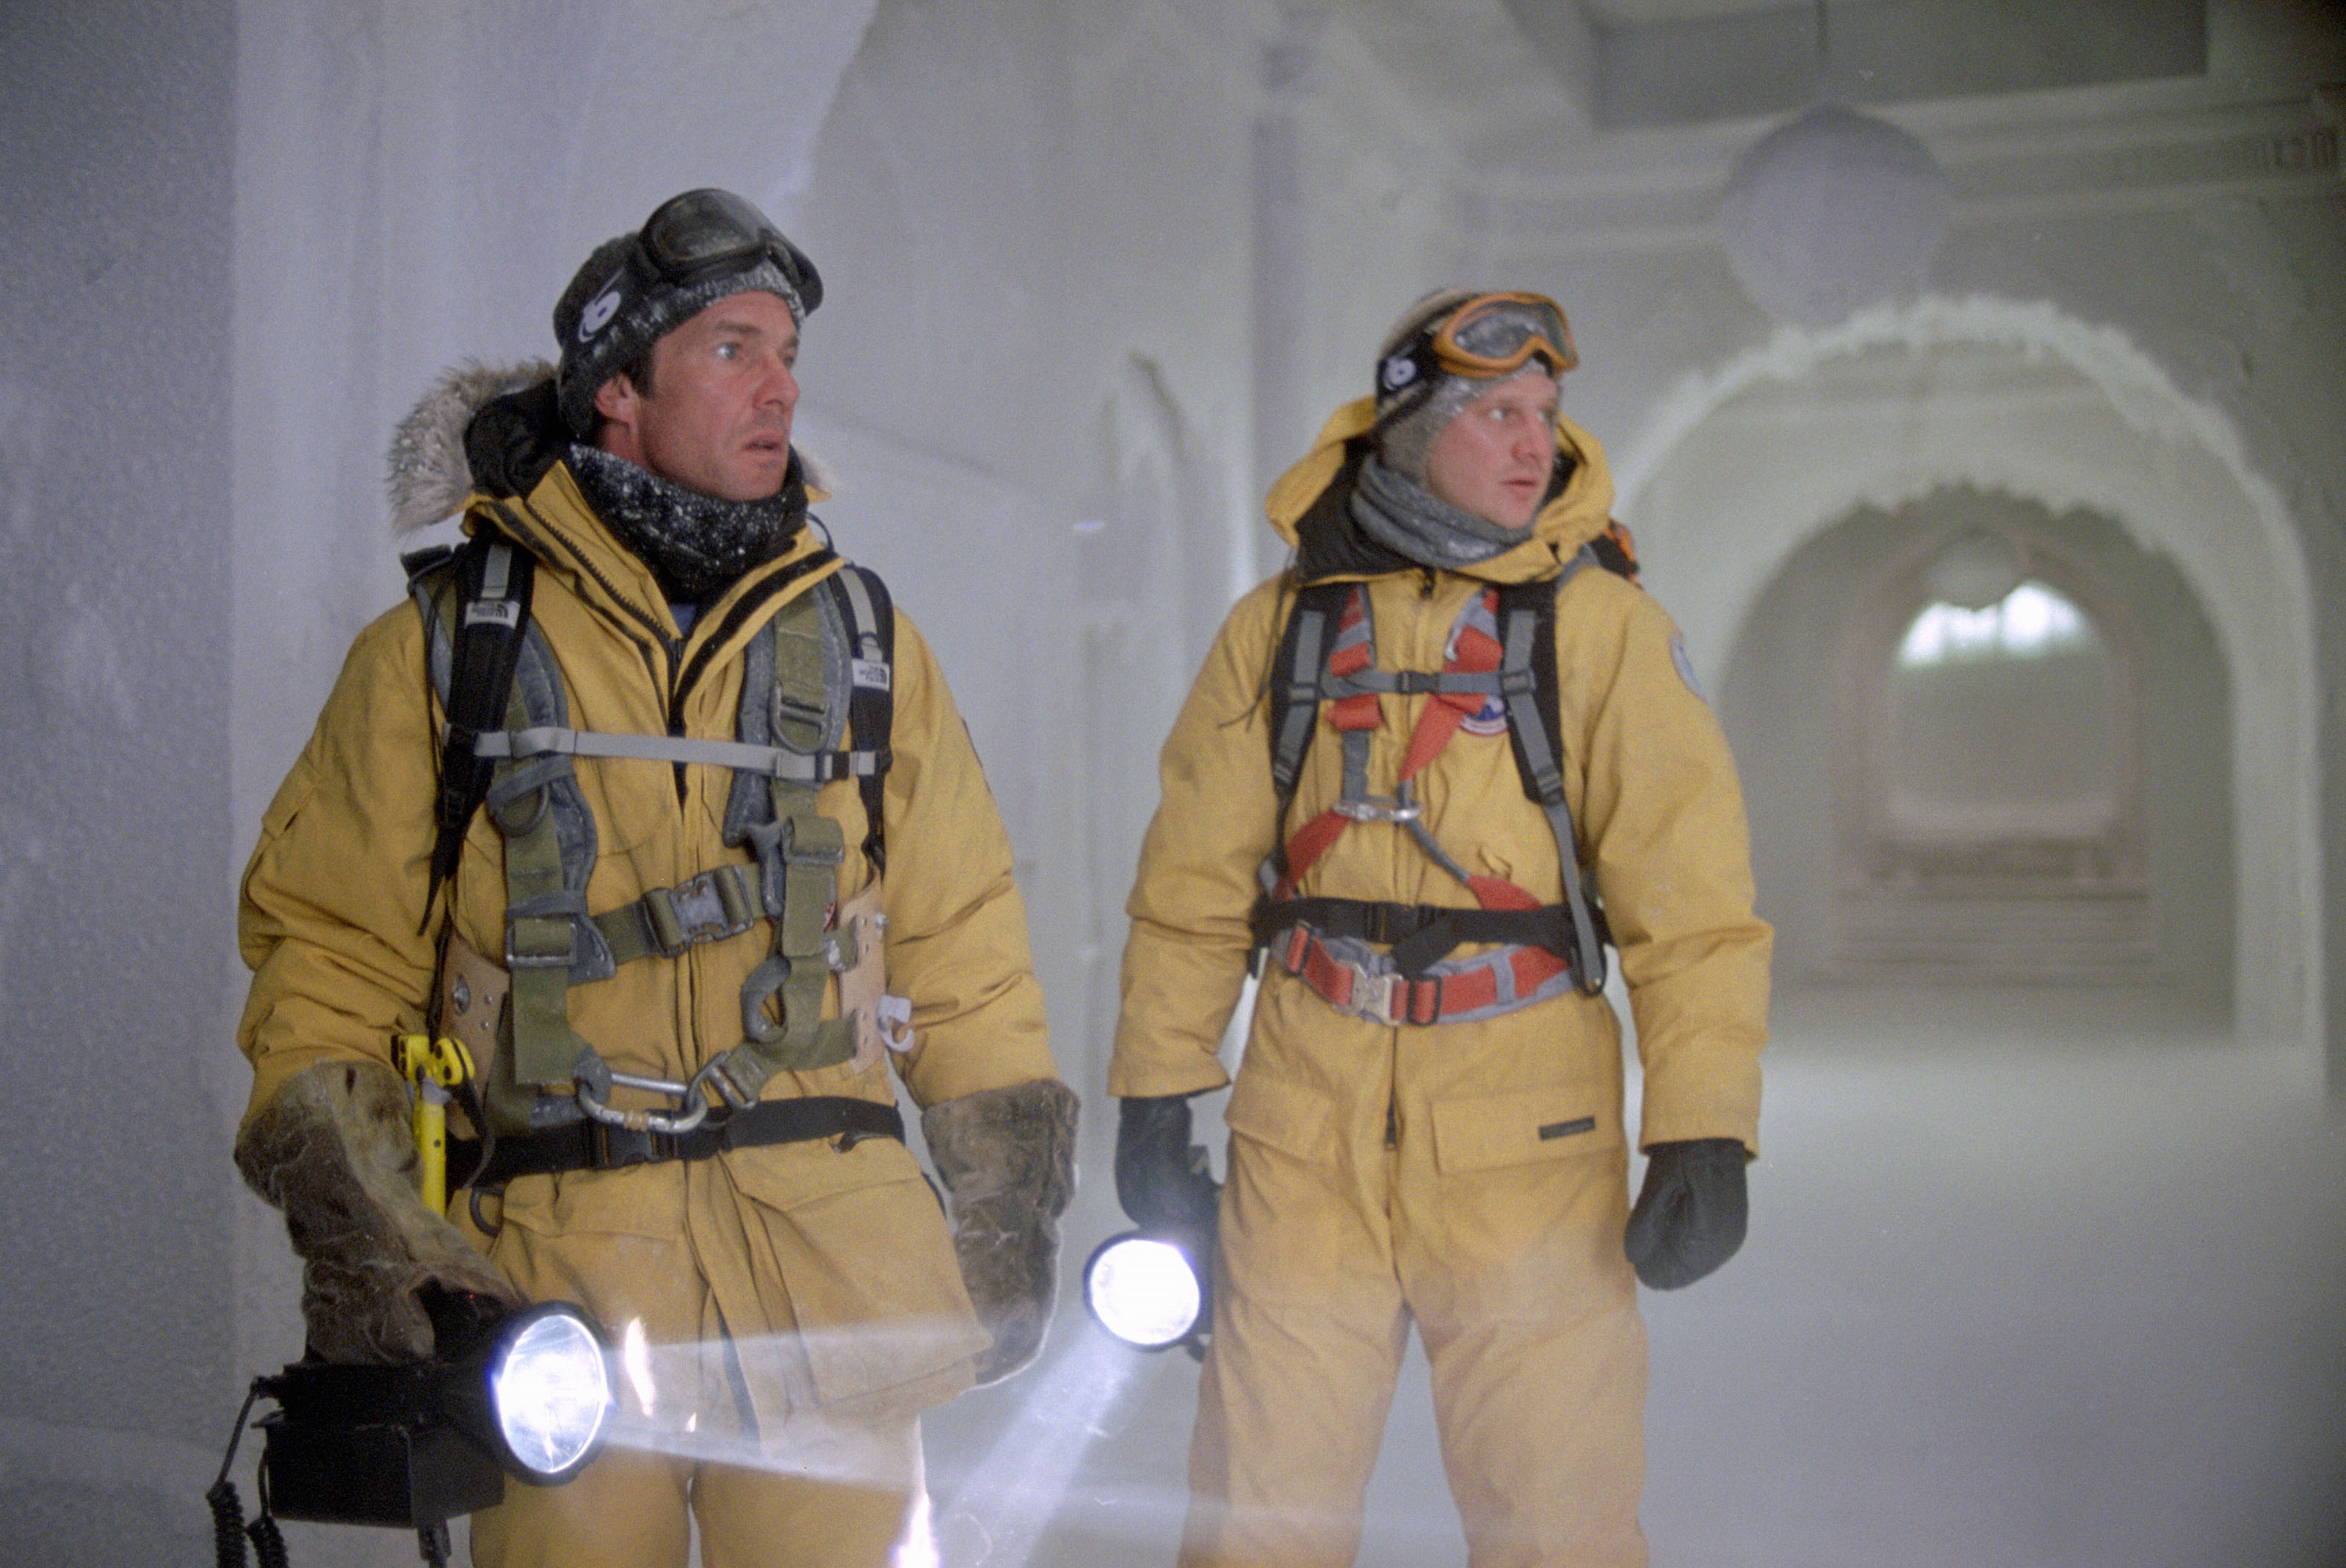 The Day After Tomorrow - 2004